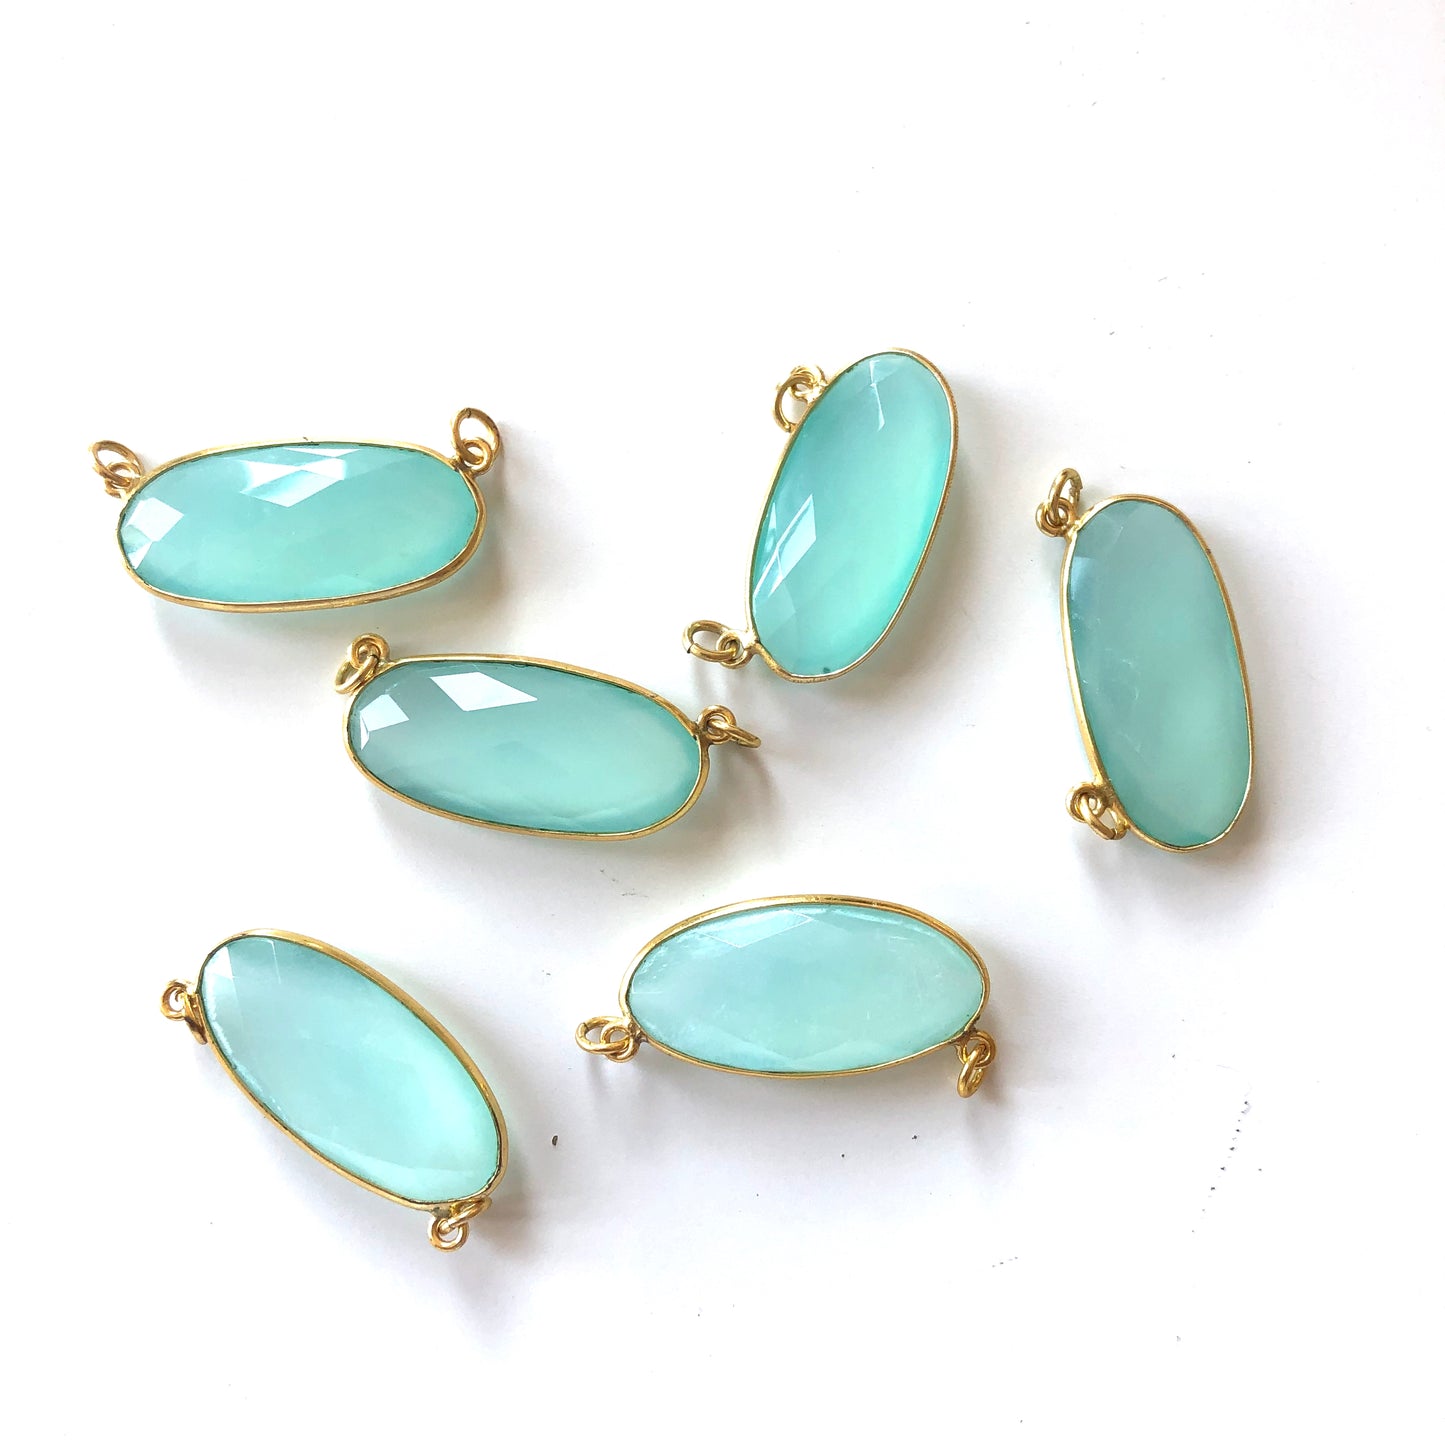 2 Pieces - Gold Plated over Silver Bezel Pendants Aqua Chalcedony Oval